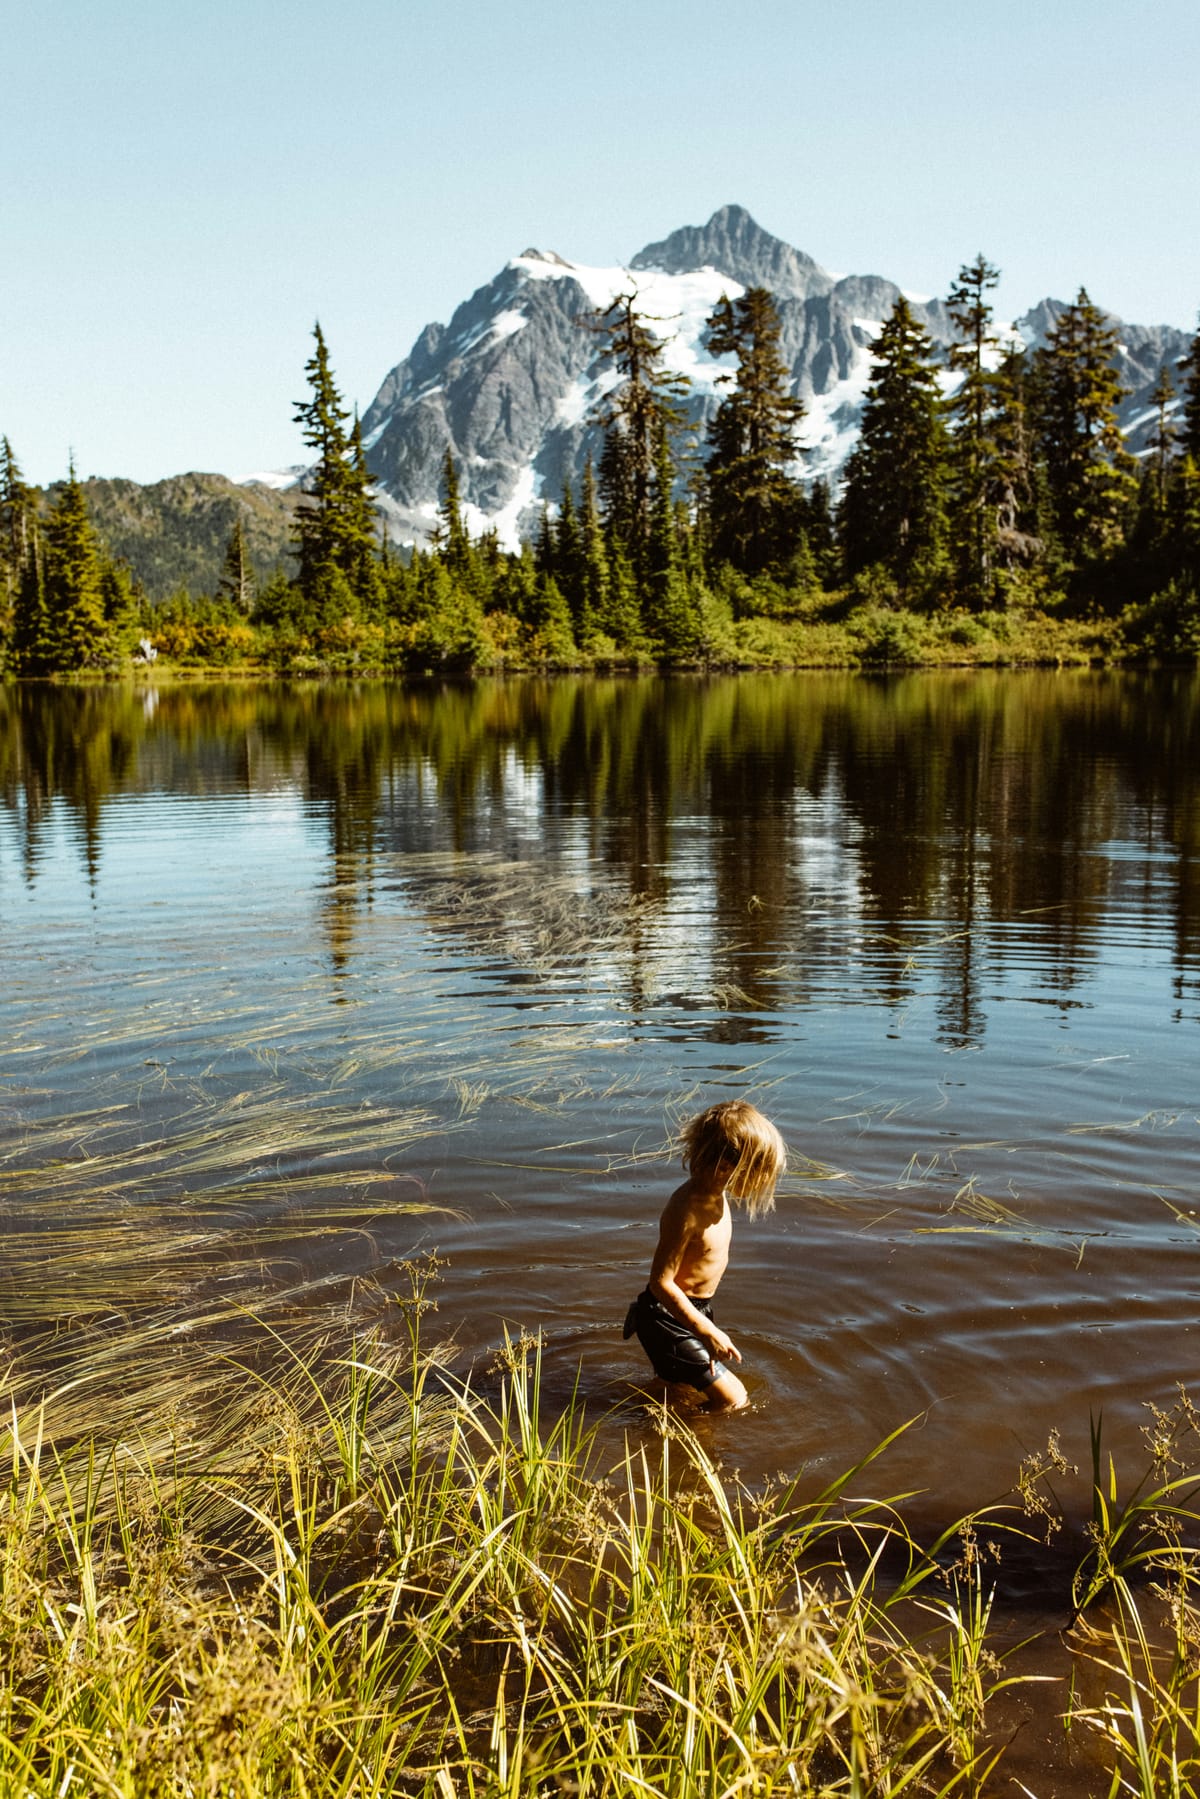 Magical mountain scene with a child wading in a lake in the foreground